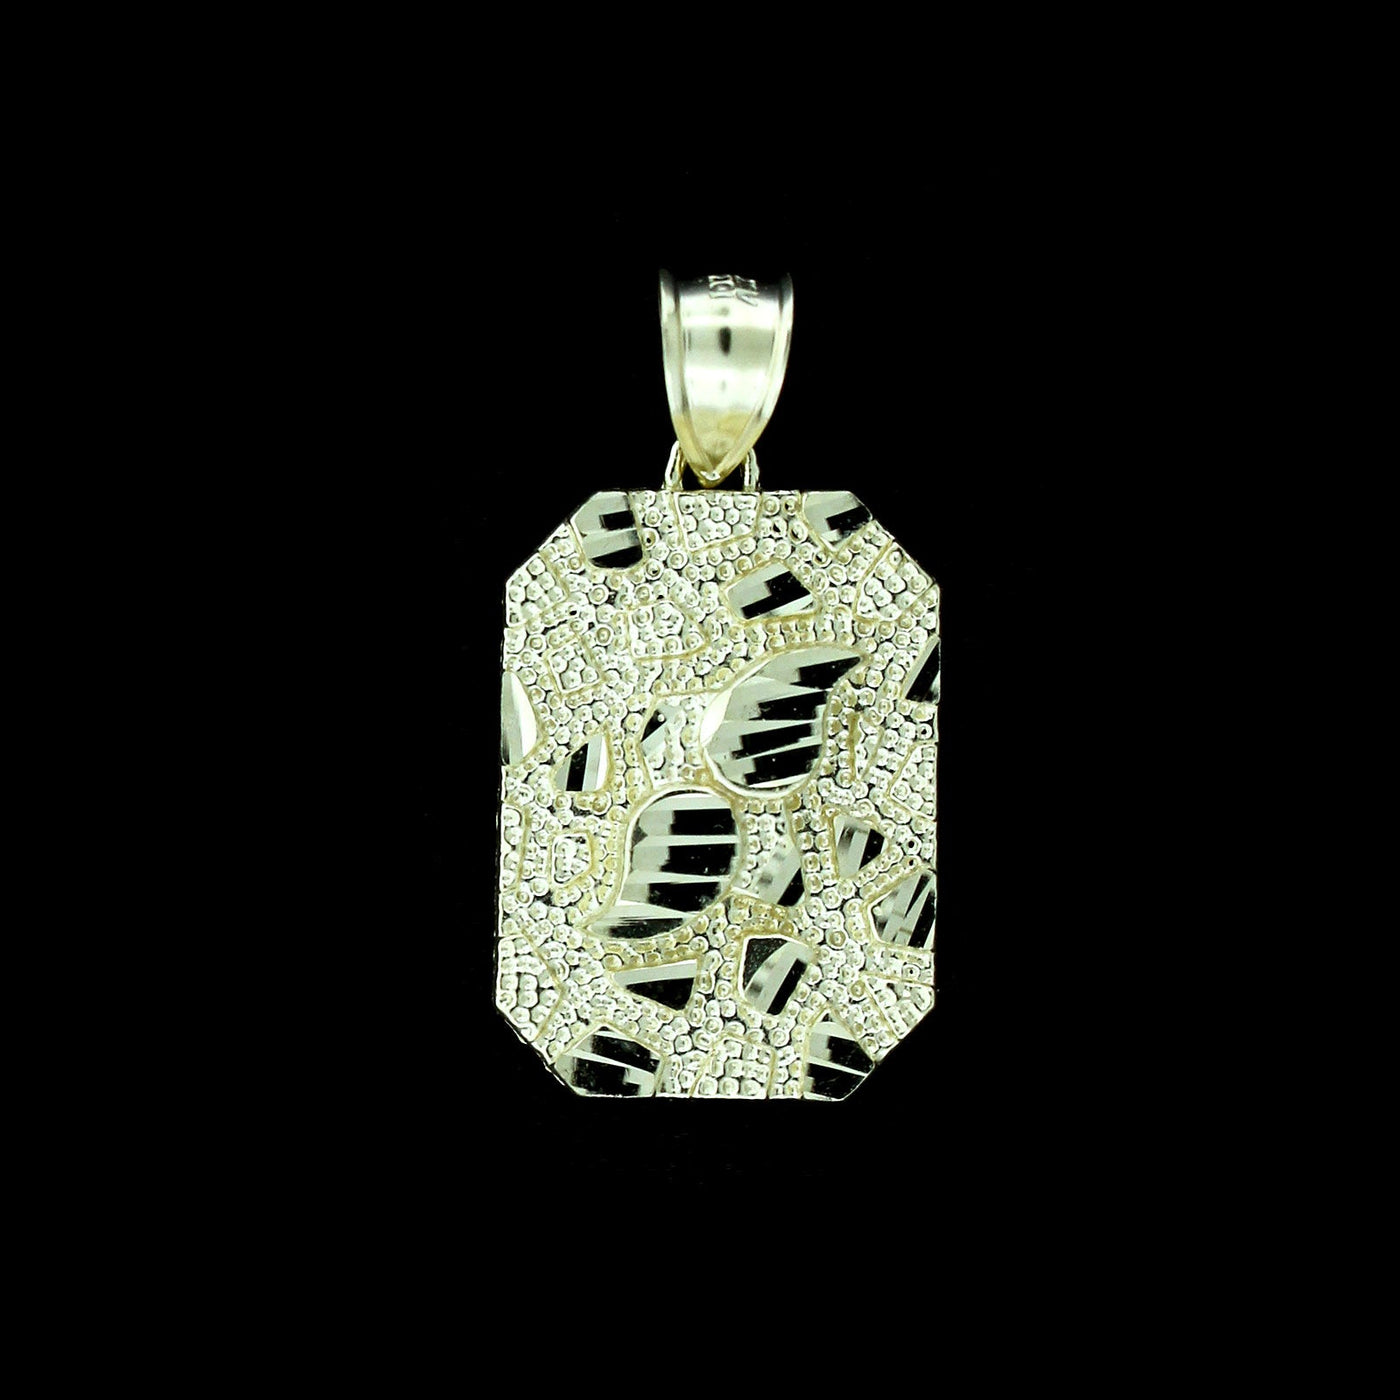 Mens 10K Yellow Gold Diamond Cut Nugget Style Charm Pendant, 10KT Real Gold